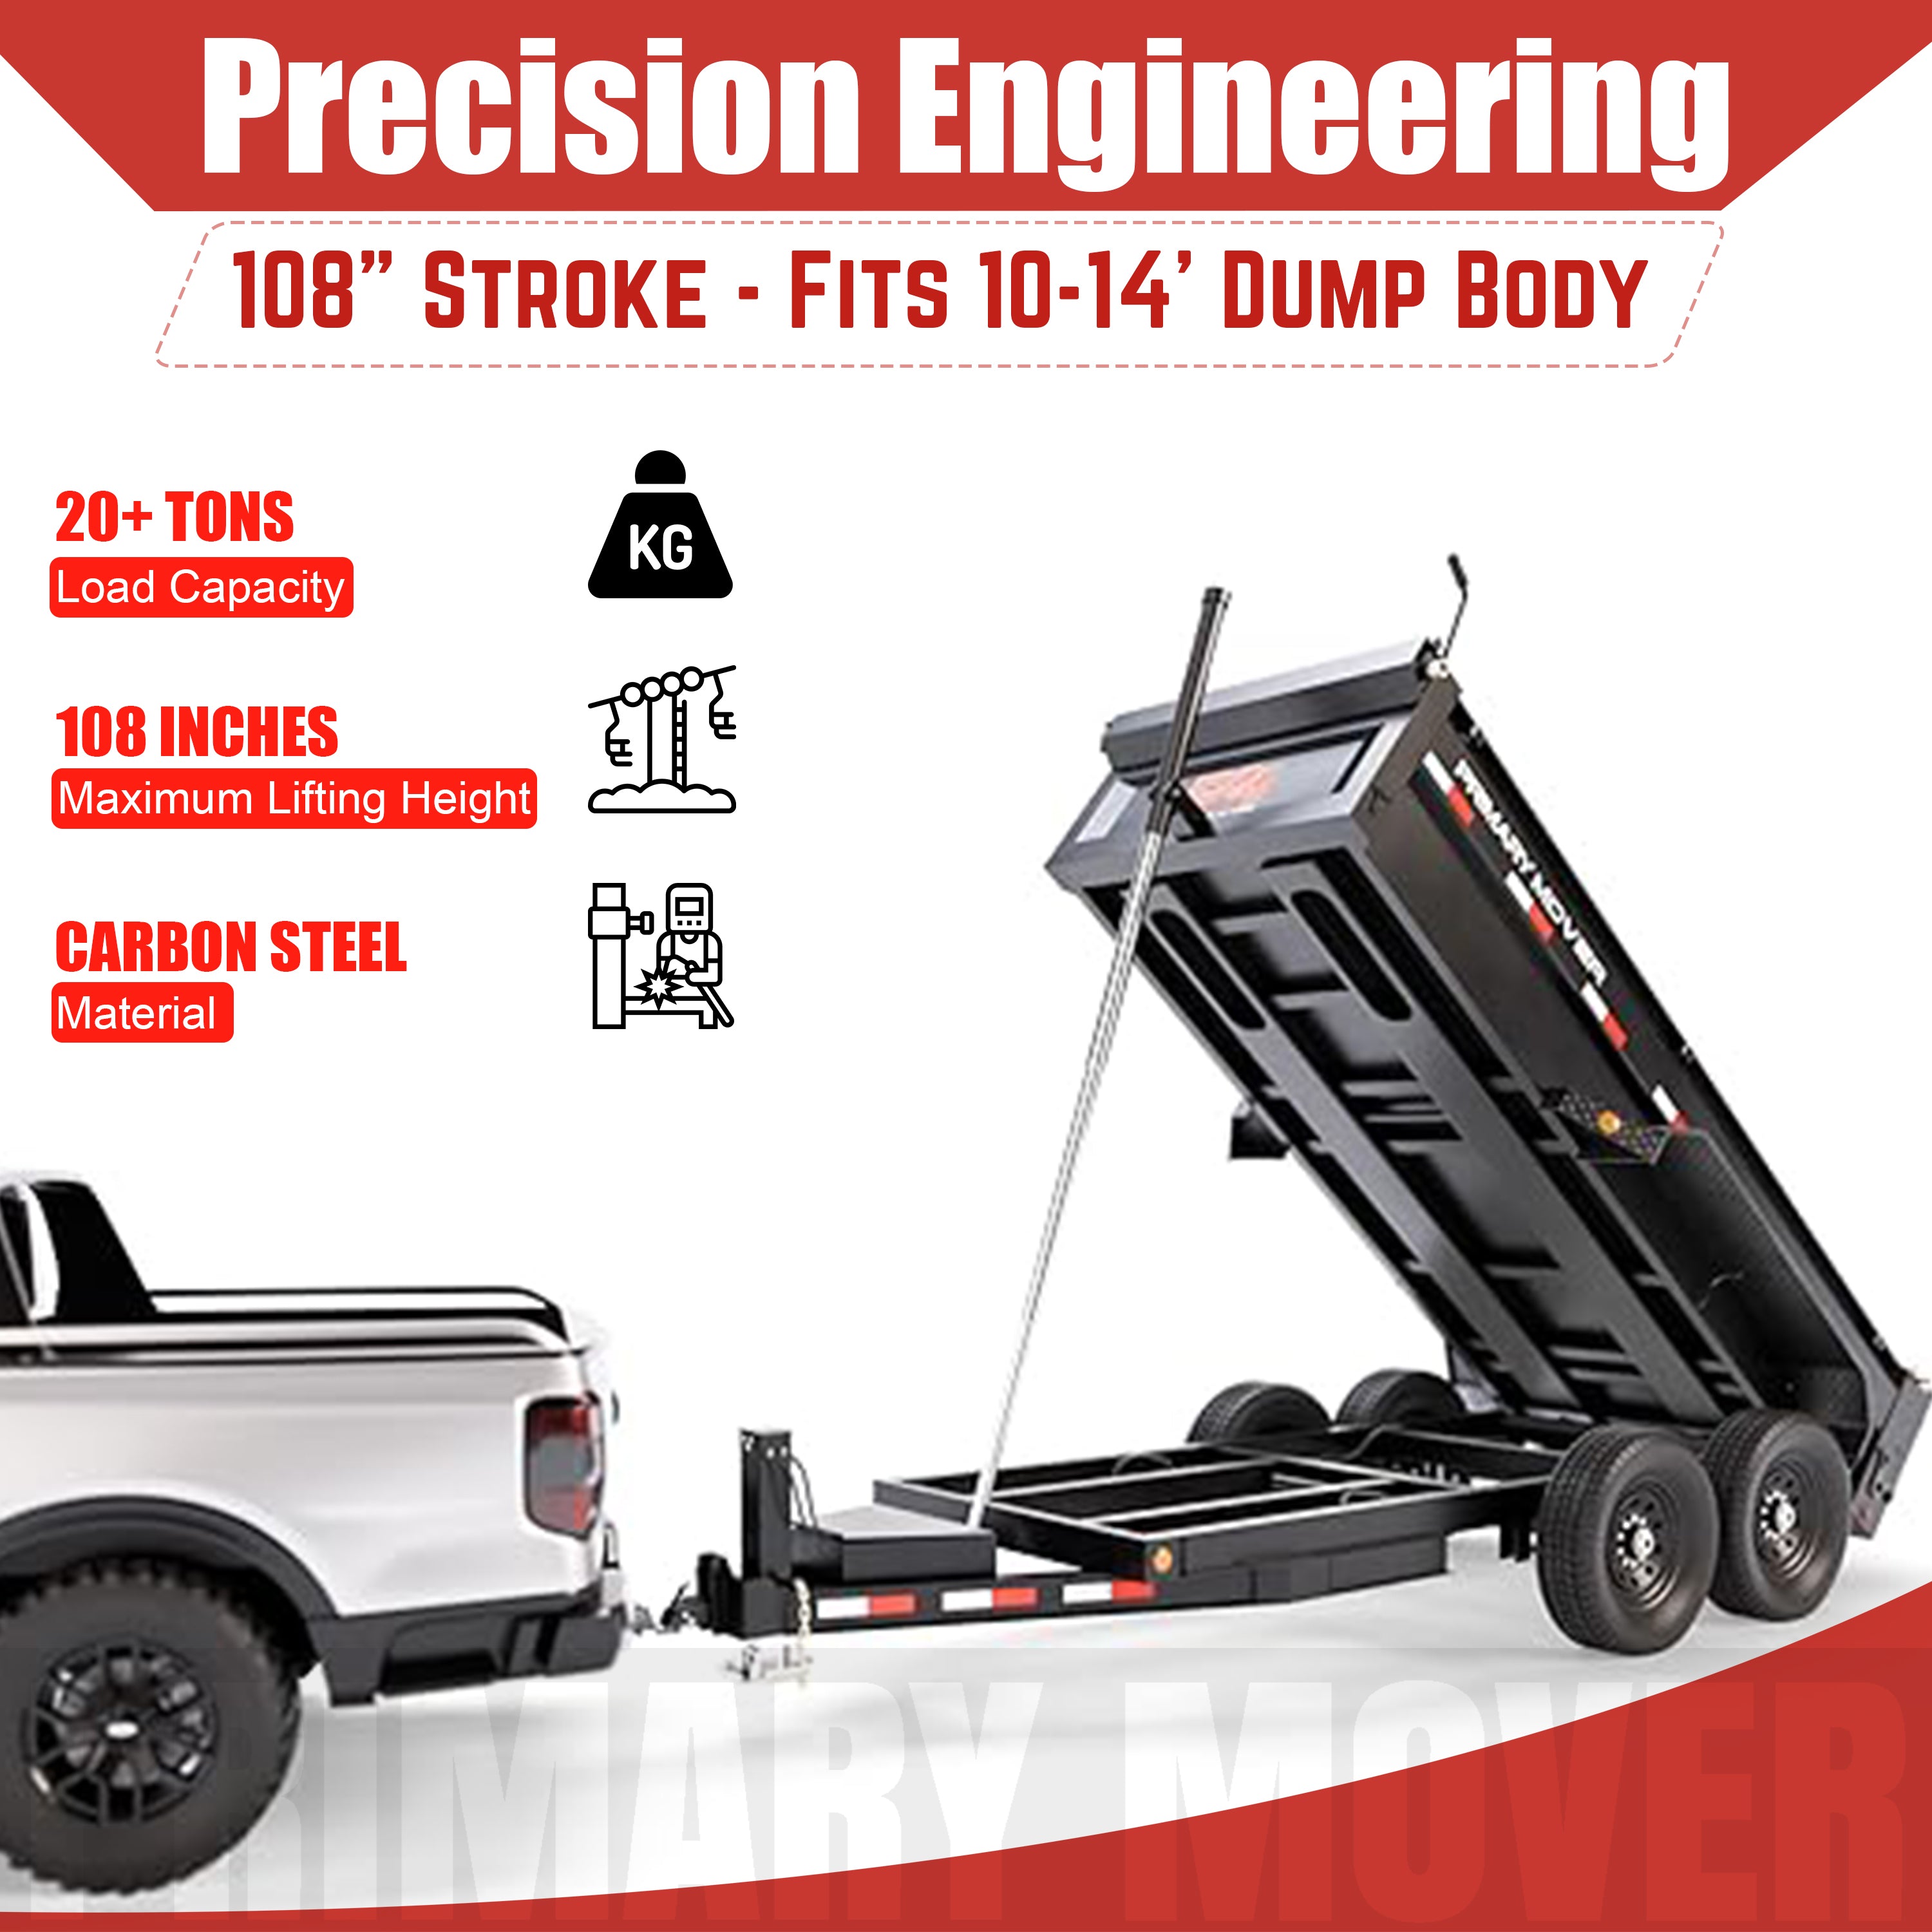 Telescopic Dump Trailer Cylinder Kit (108 Stroke, 20 Ton Capacity) attached to a white truck, featuring a black trailer with visible wheels.